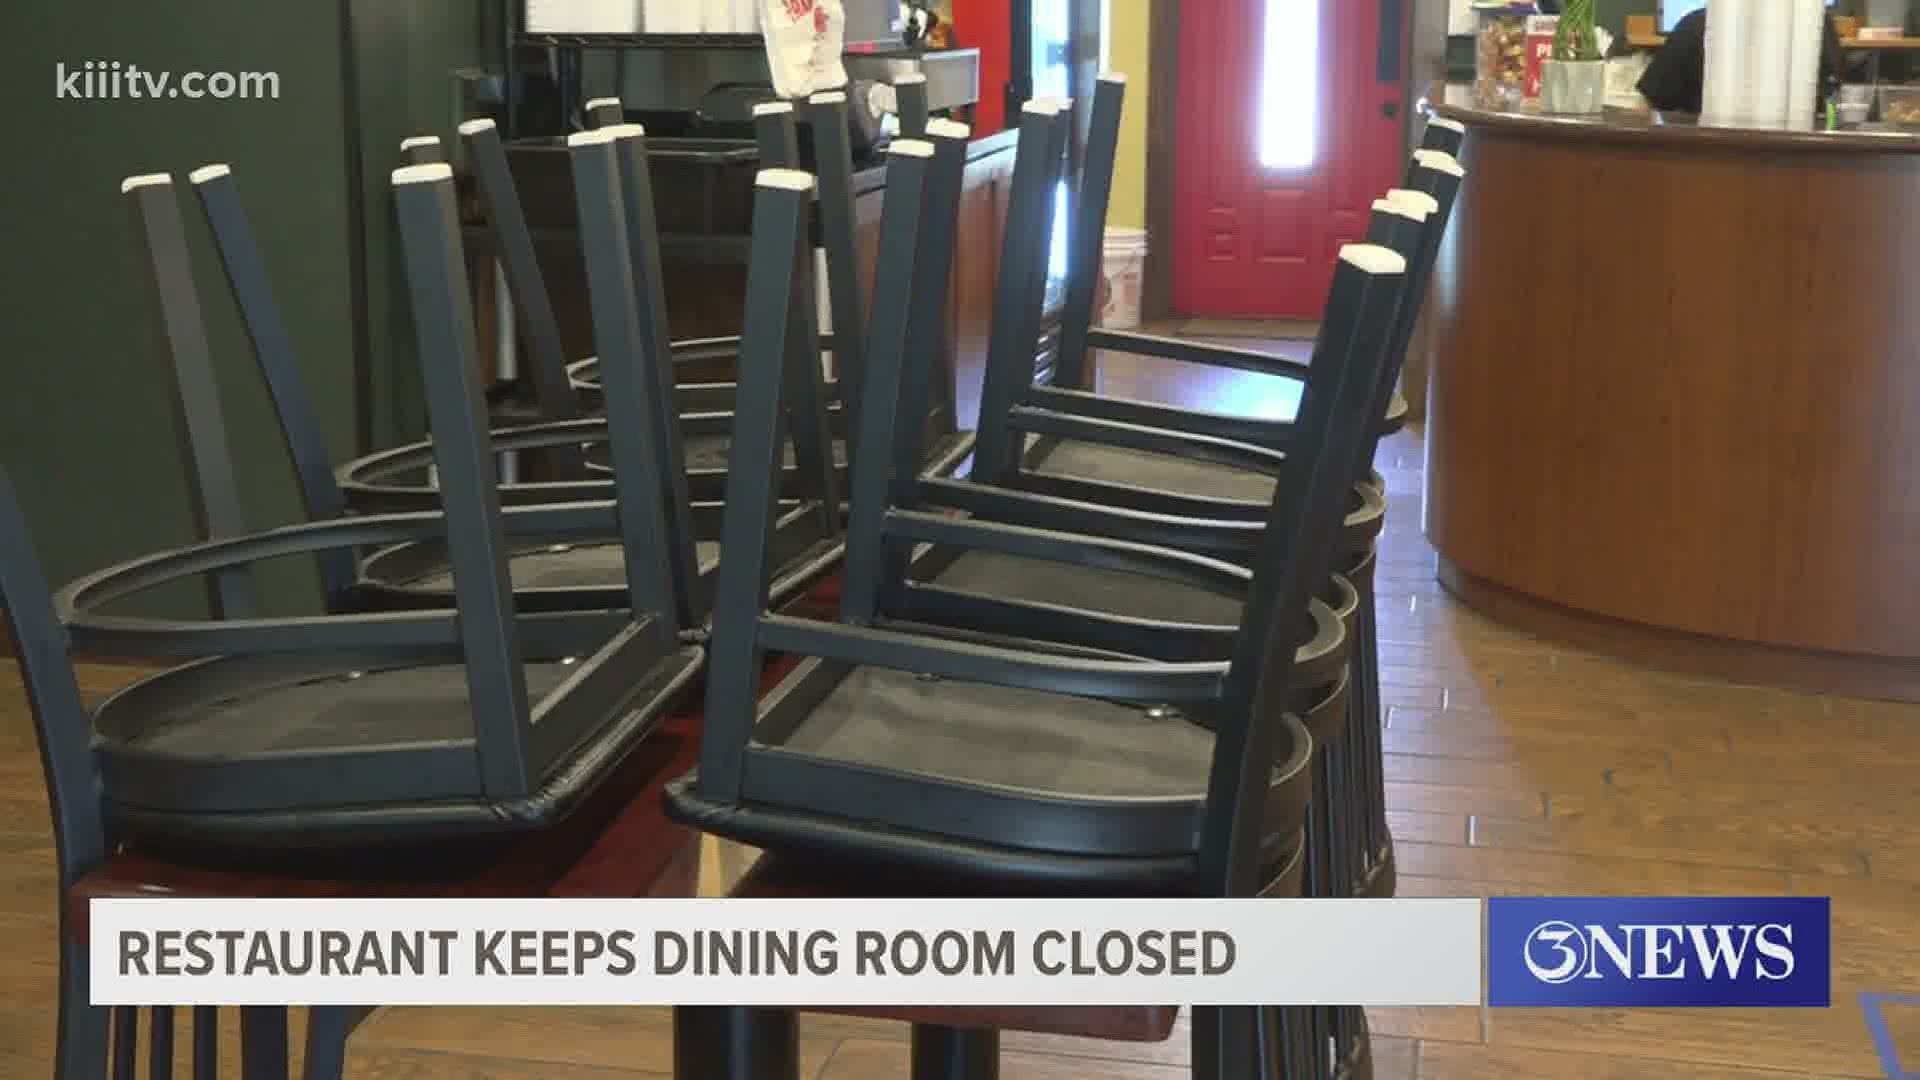 While some eateries have decided to reopen their dining rooms, others did not.